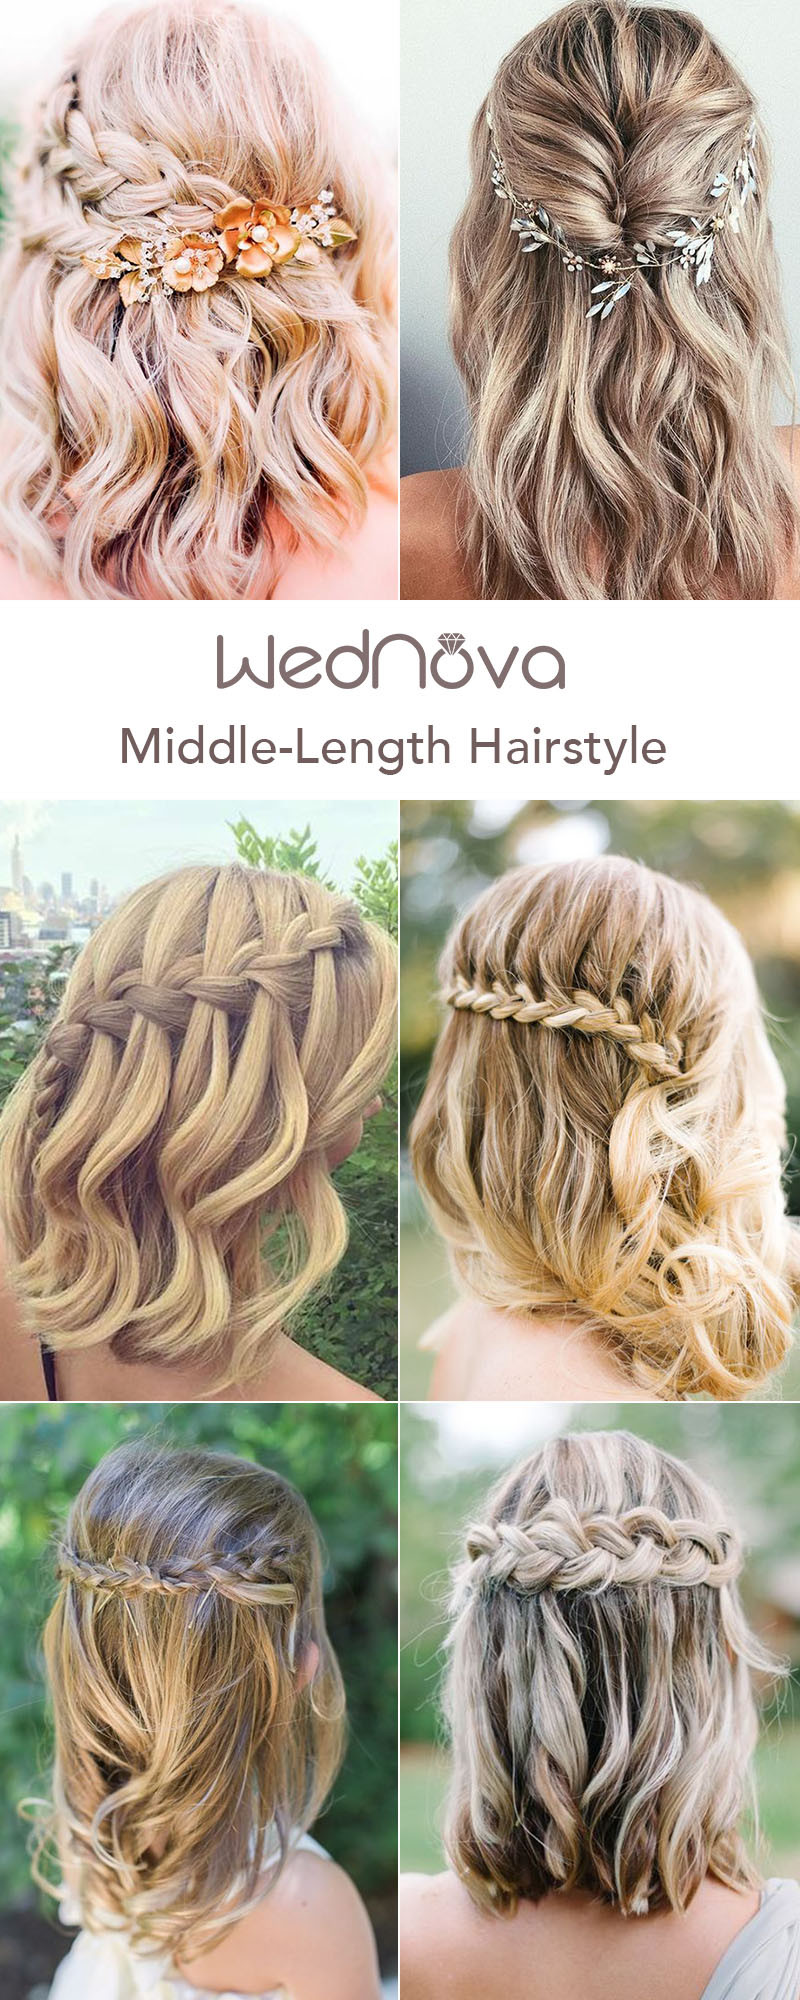 Bridesmaid Hairstyles For Medium Hair Down
 48 Easy Wedding Hairstyles Best Guide for Your Bridesmaids